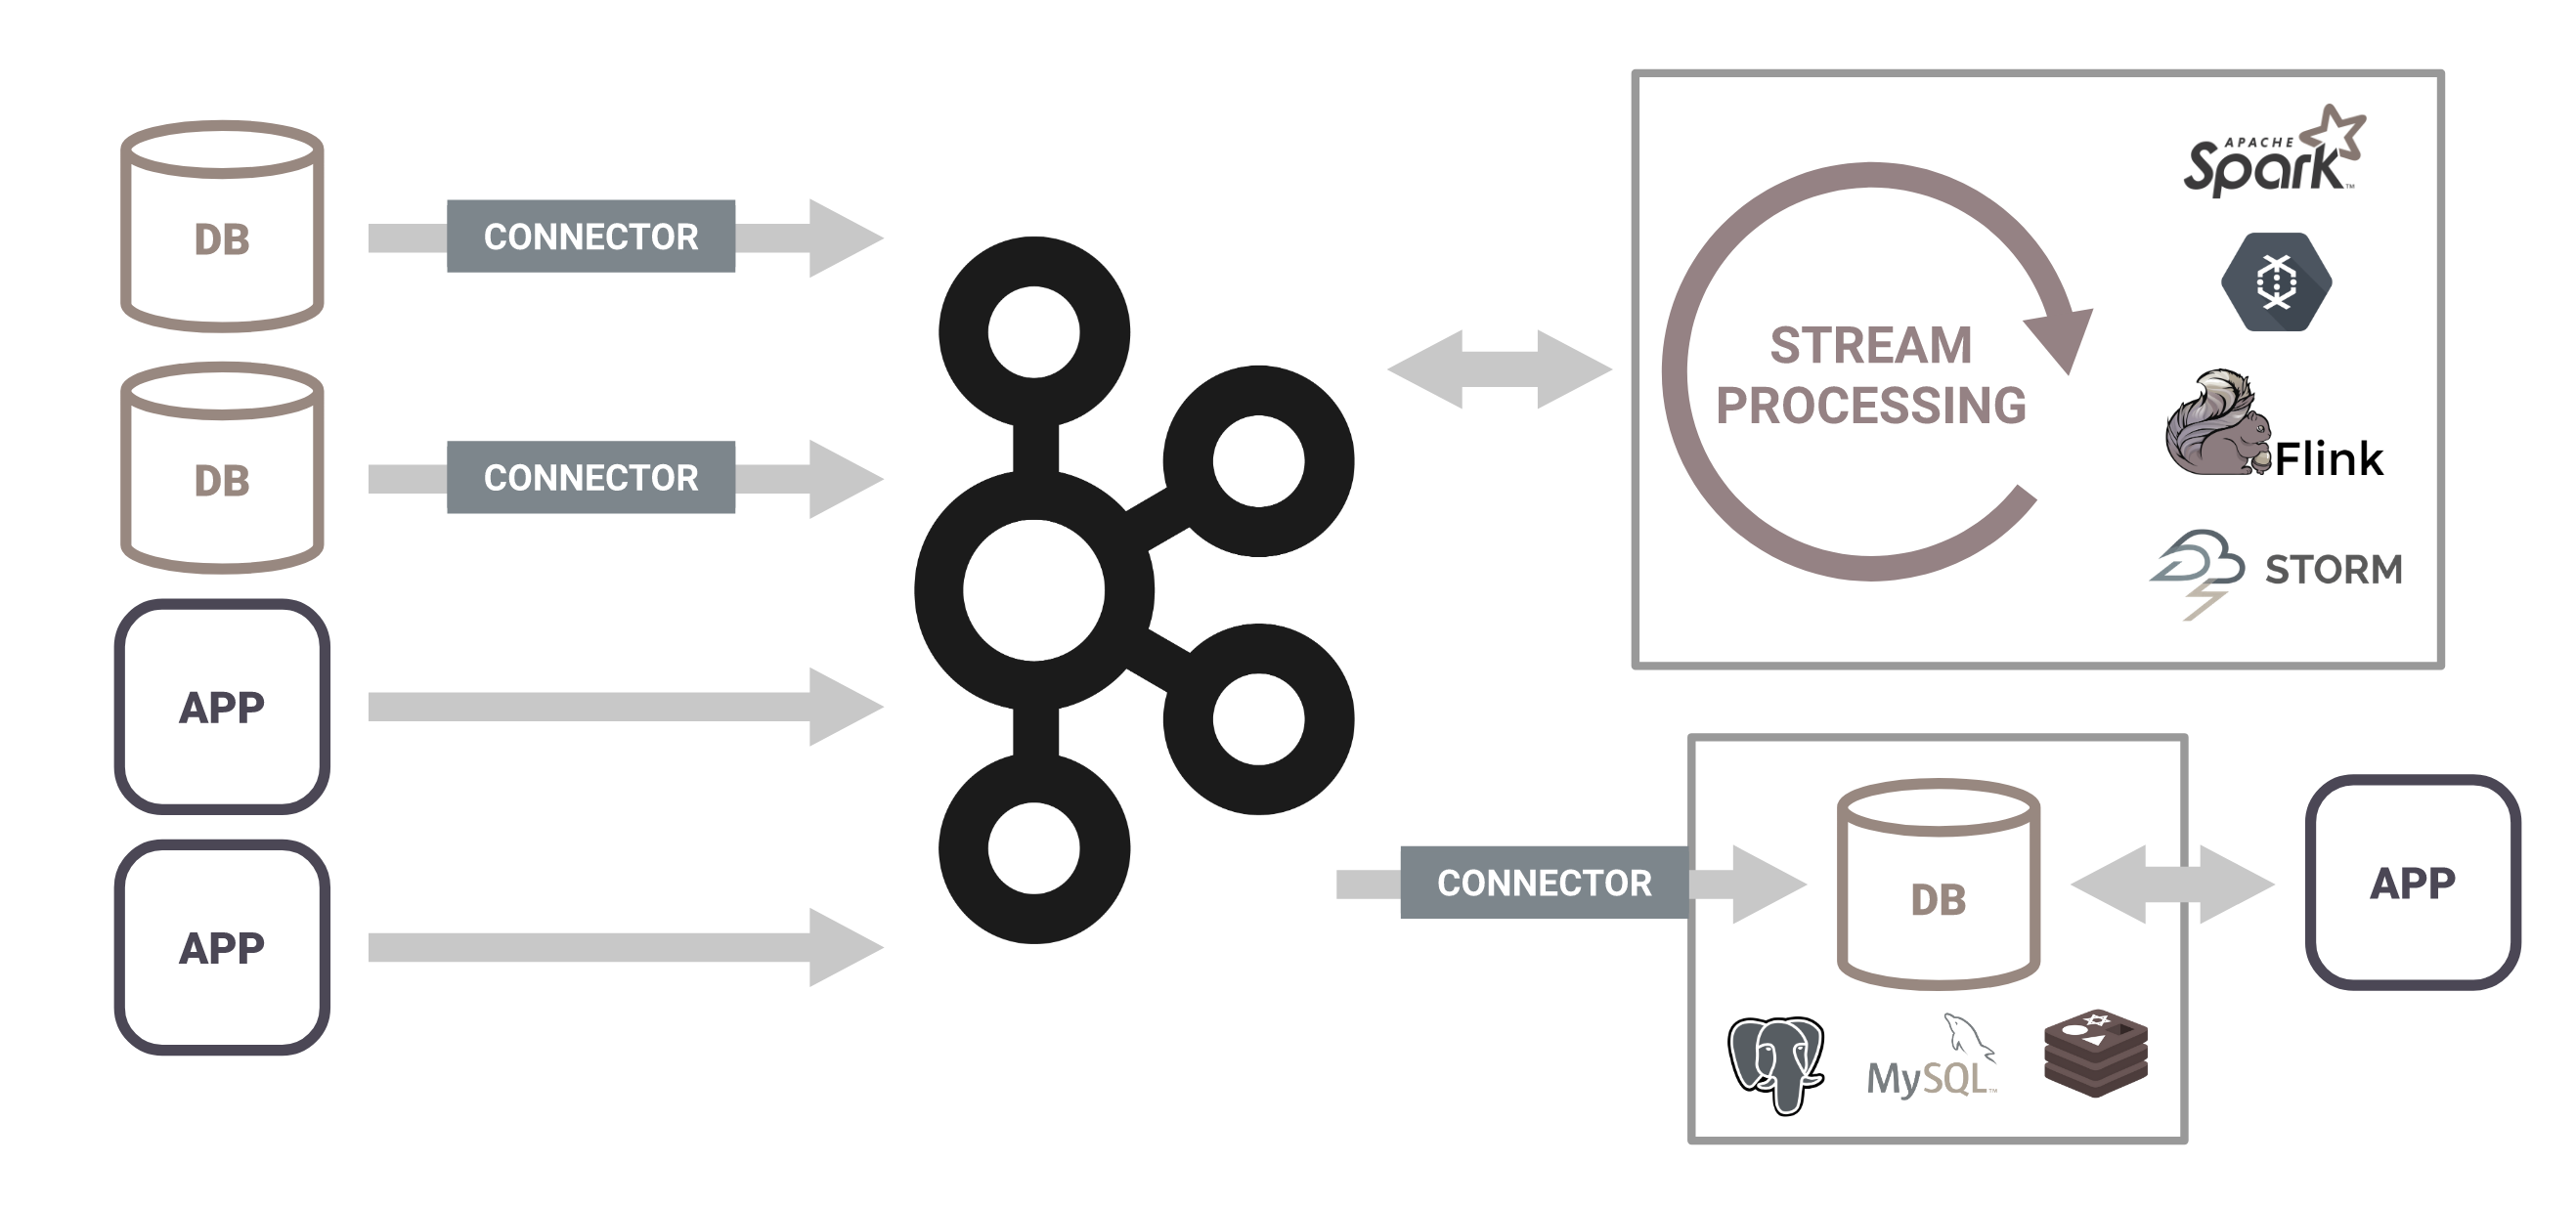 Diagram of a streaming architecture that doesn't use ksqlDB